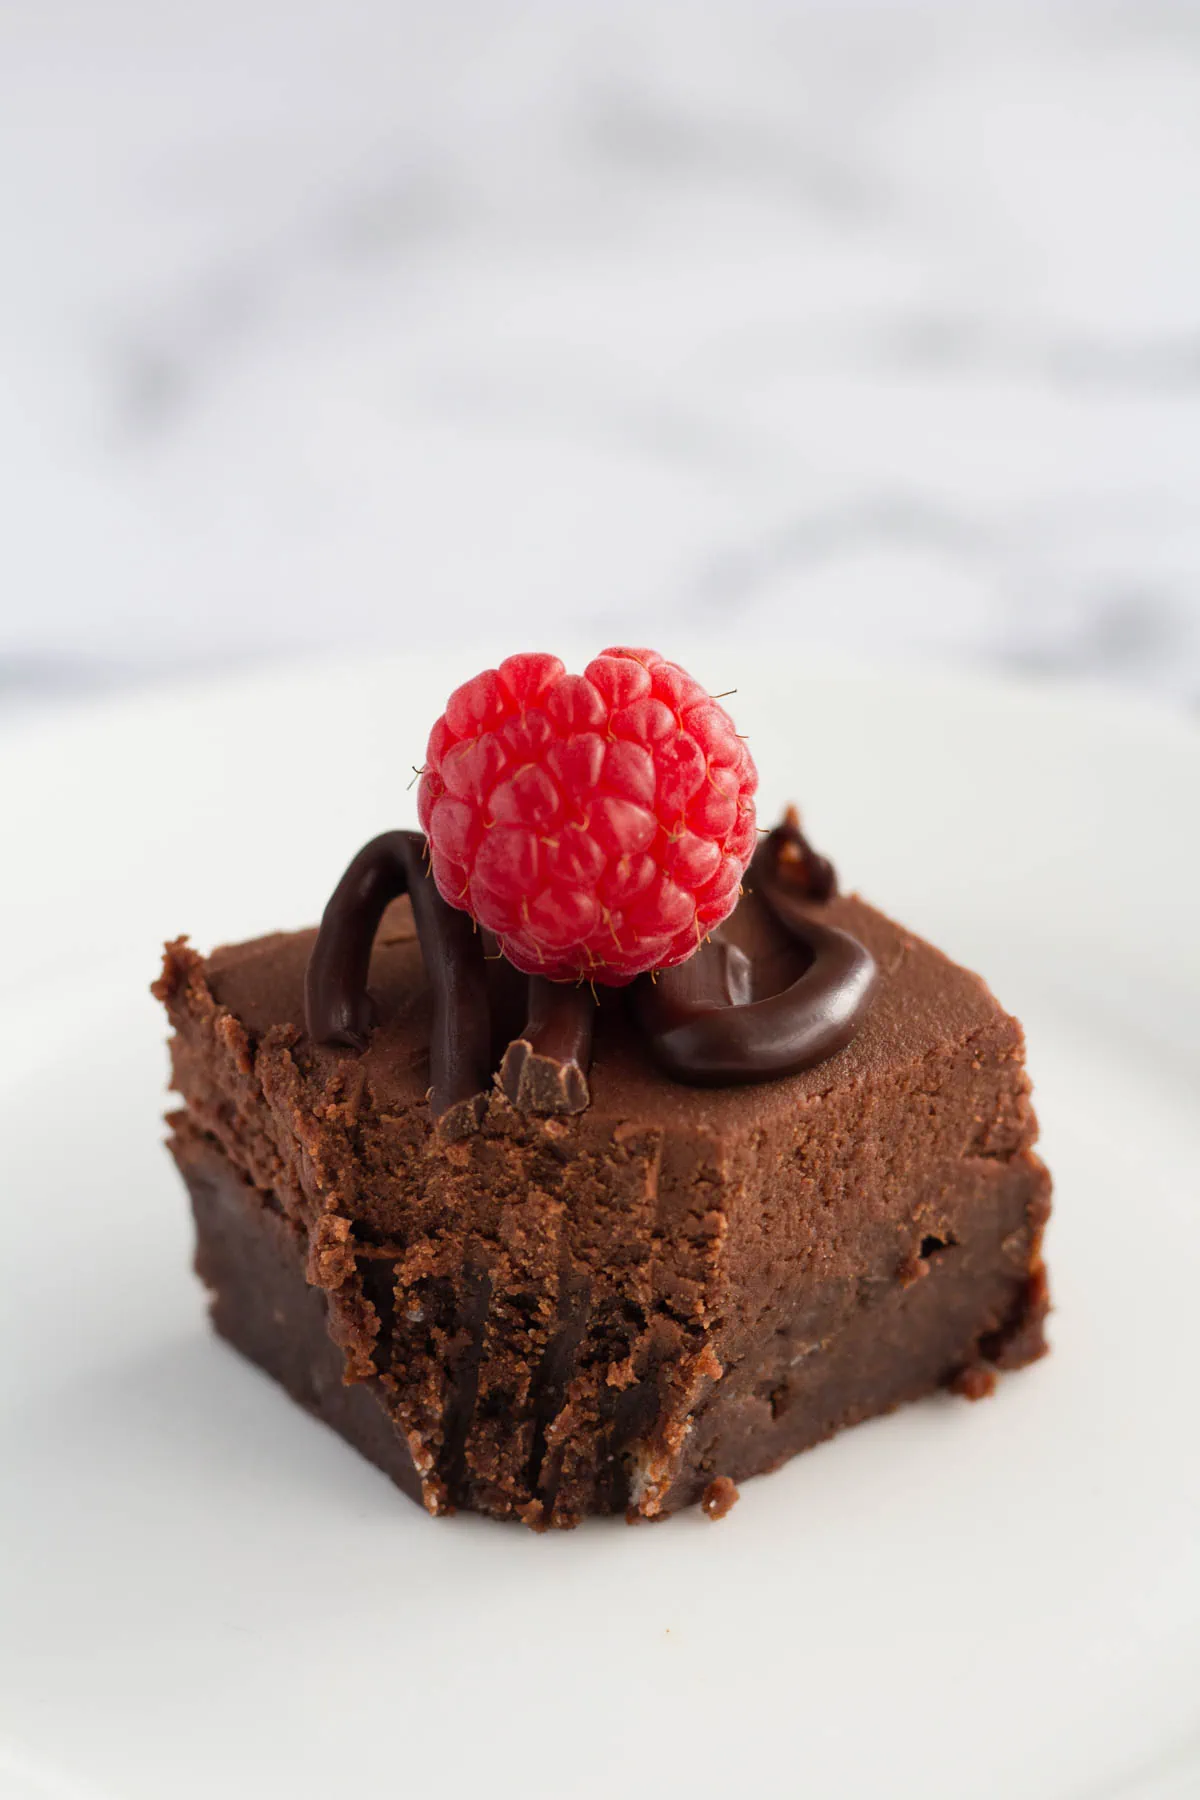 One brownie on a white plate. A fork bite has been taken out of the corner of the brownie.